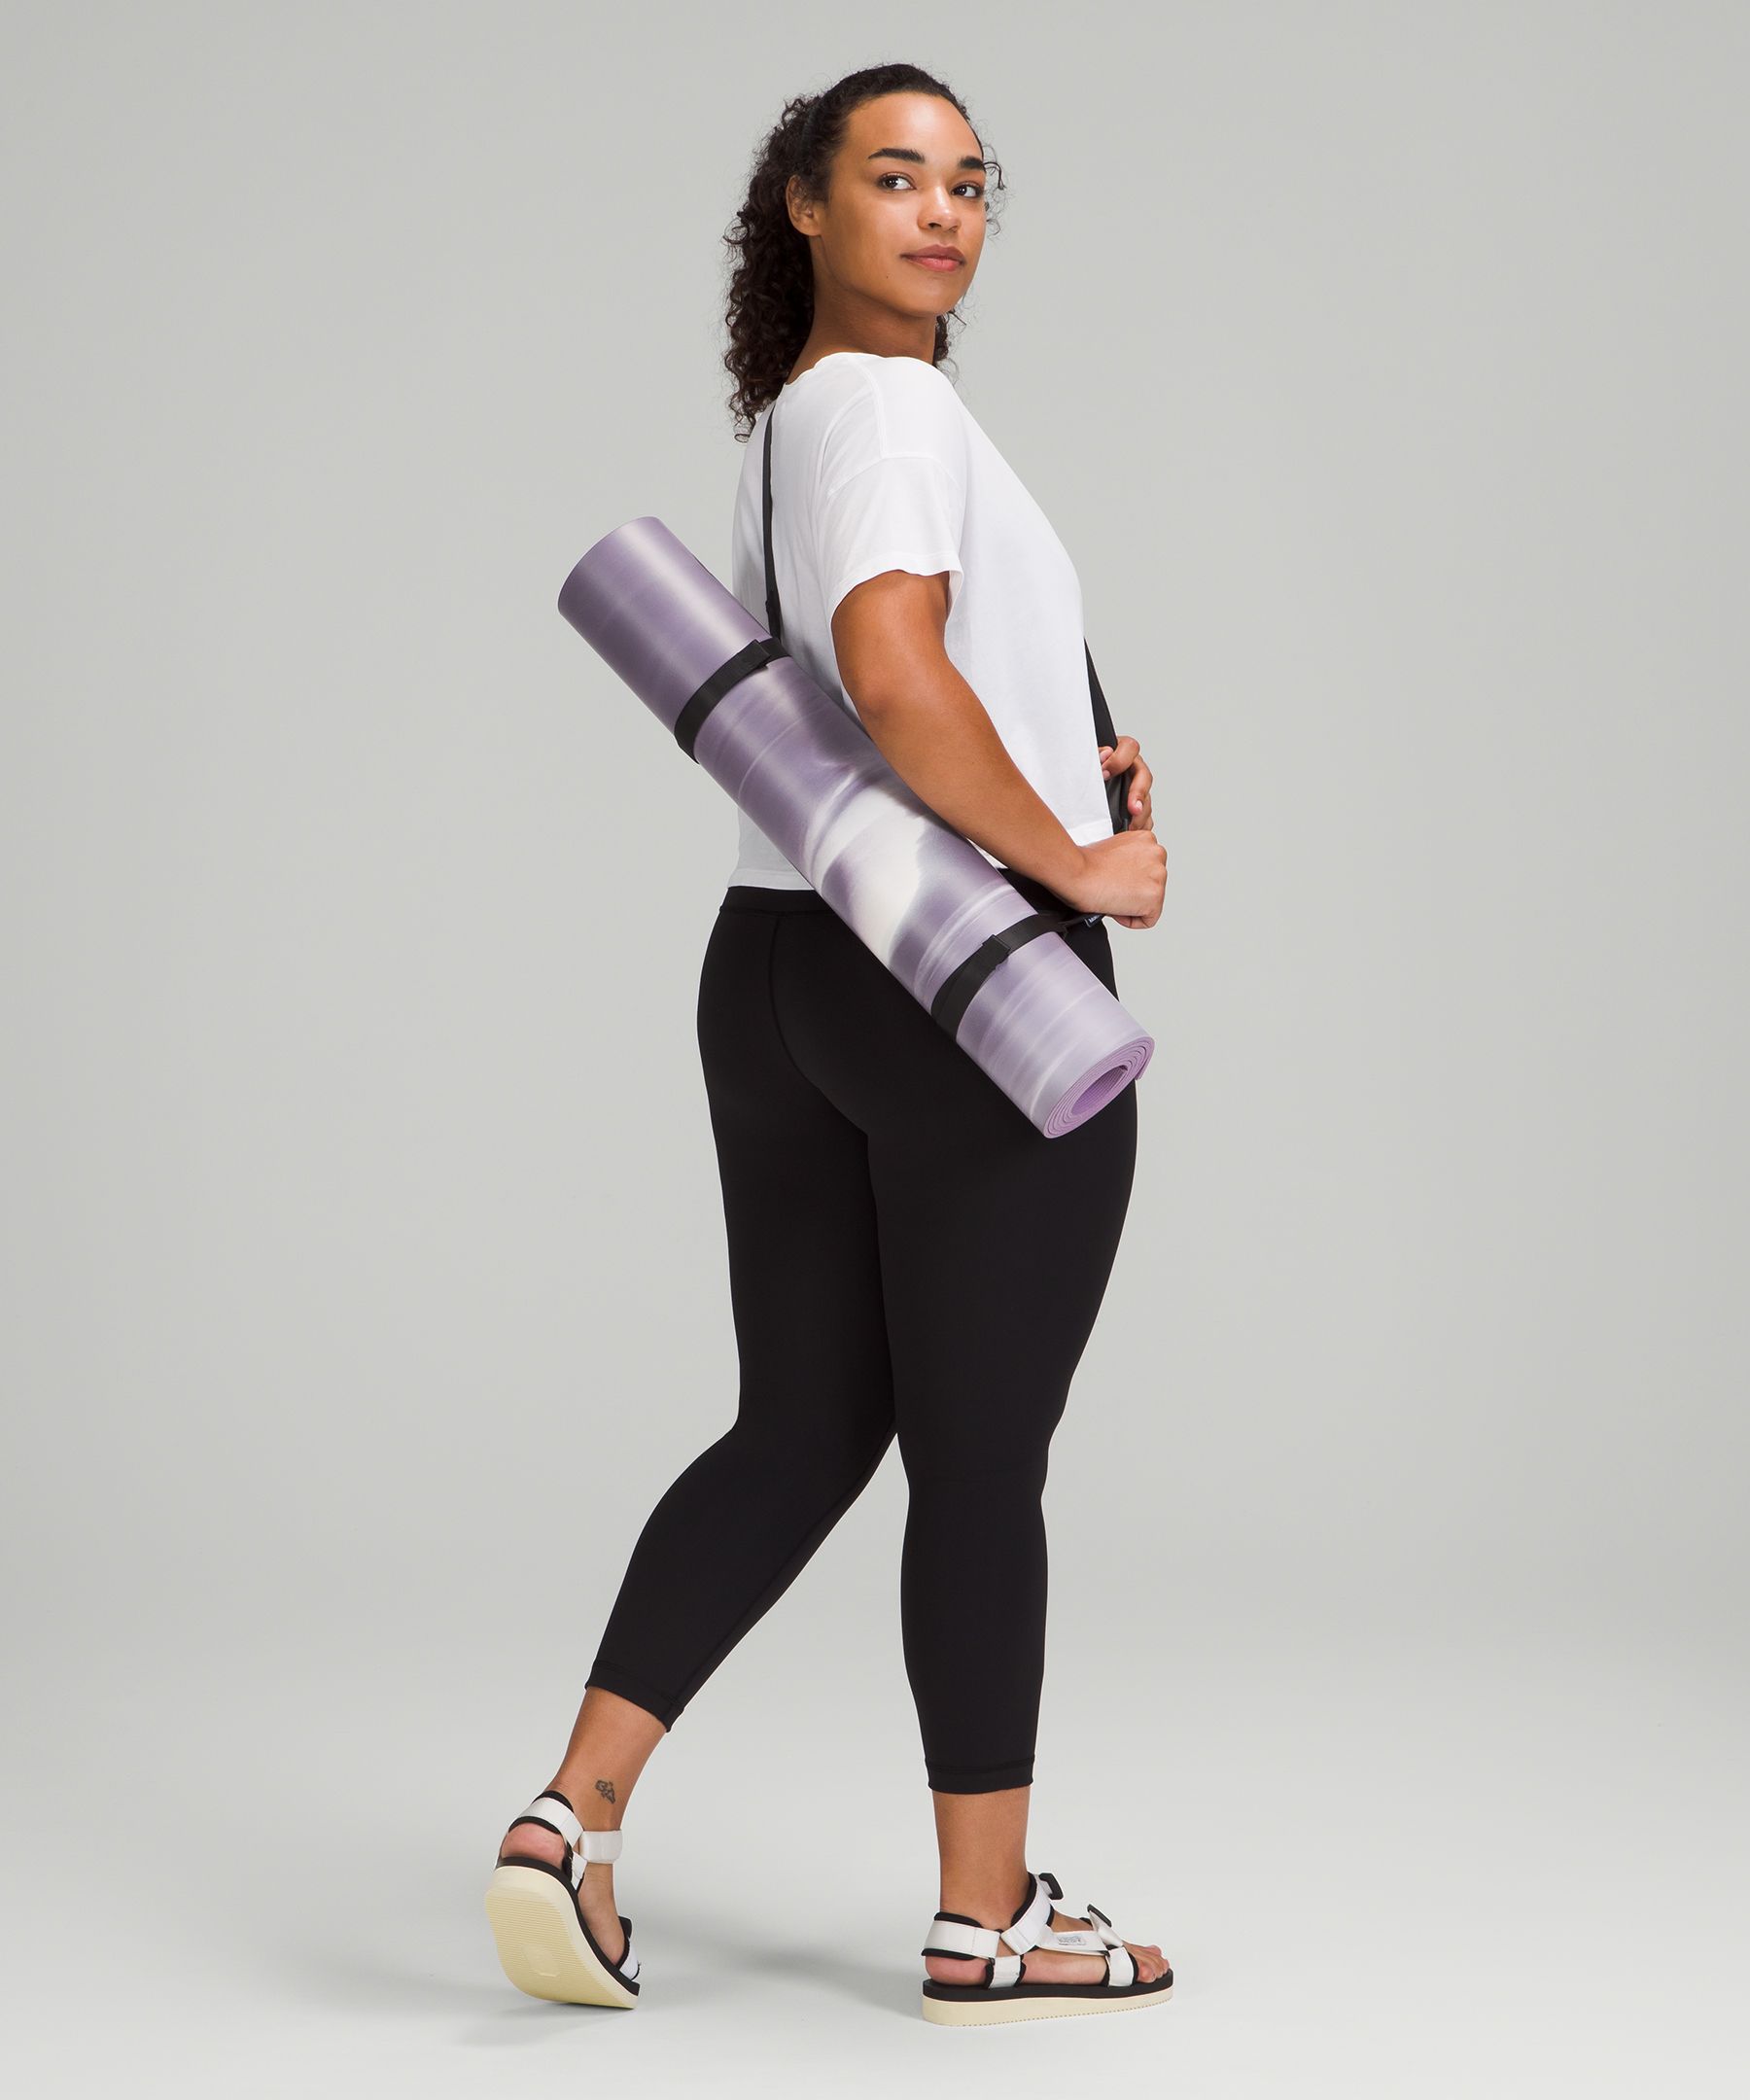 How to Use the Lululemon Yoga Strap for Your Practice - Playbite